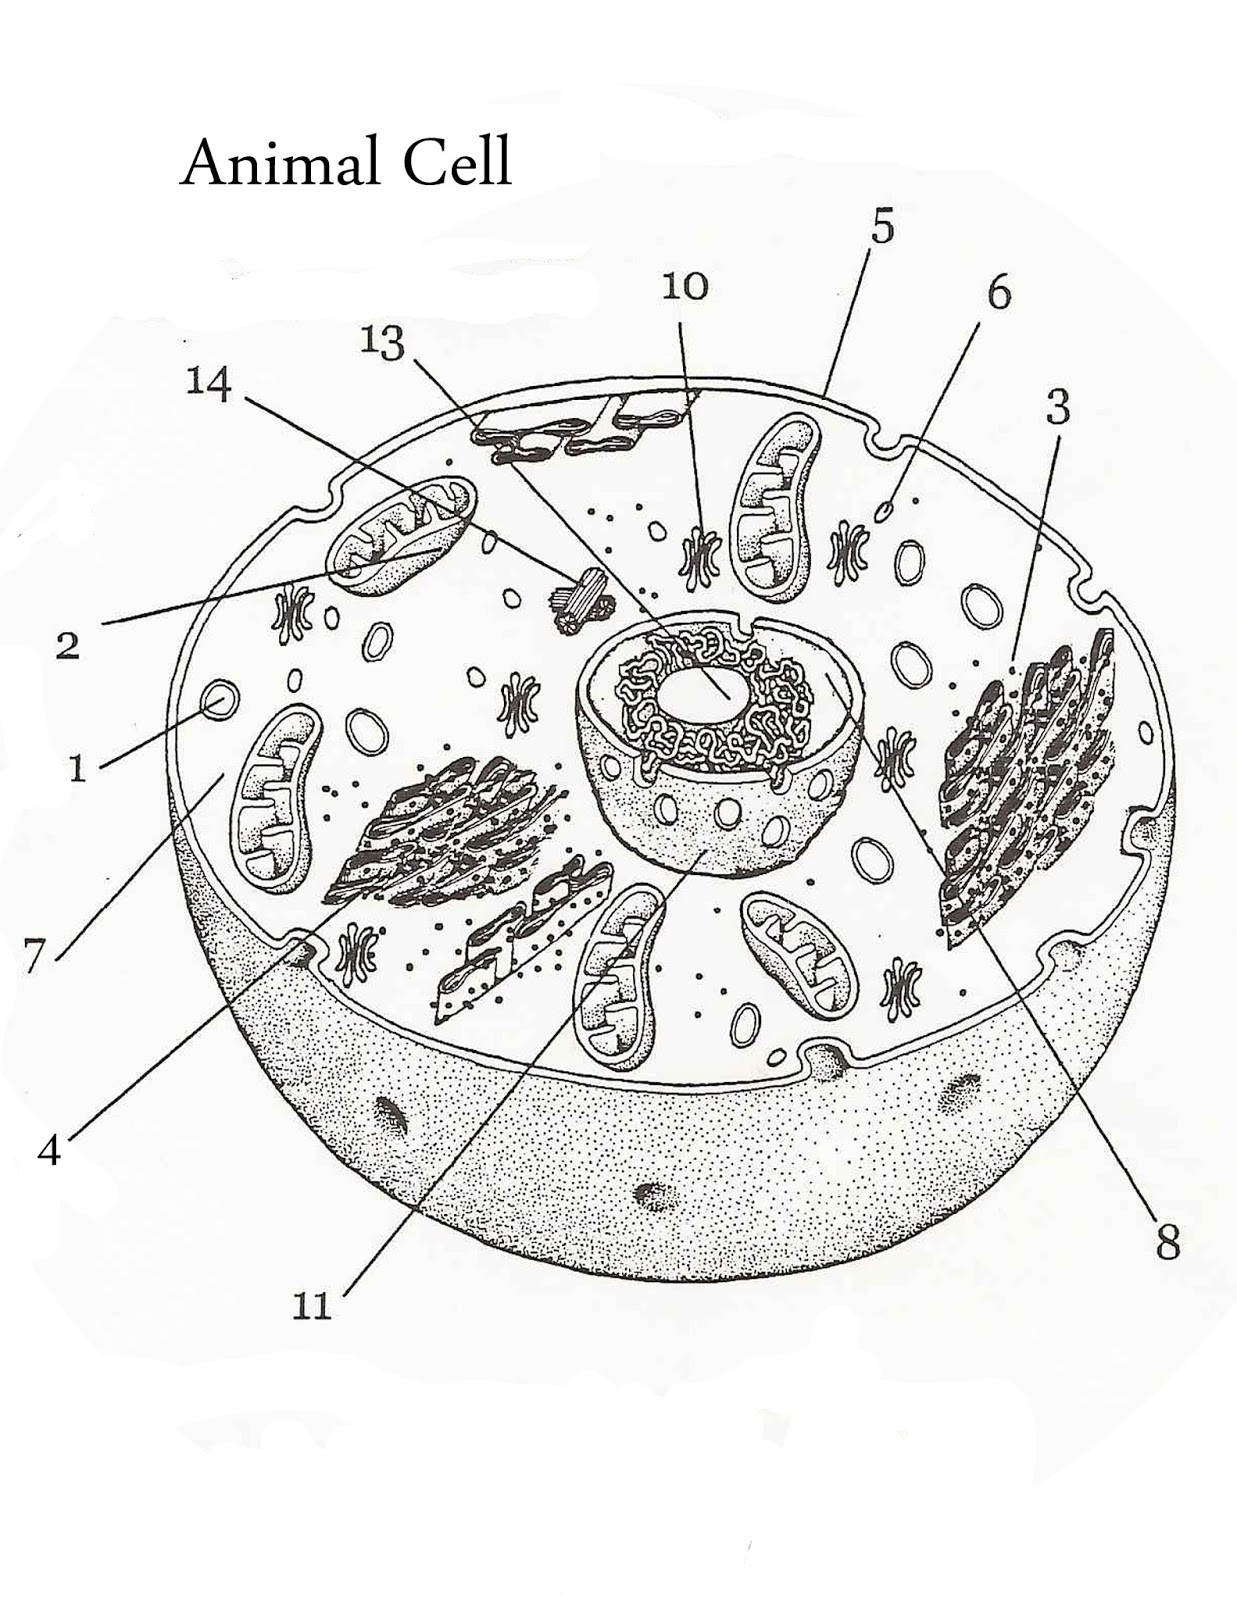 Animal Cell Worksheet Answers Animal Cells Drawing at Getdrawings Free Identification